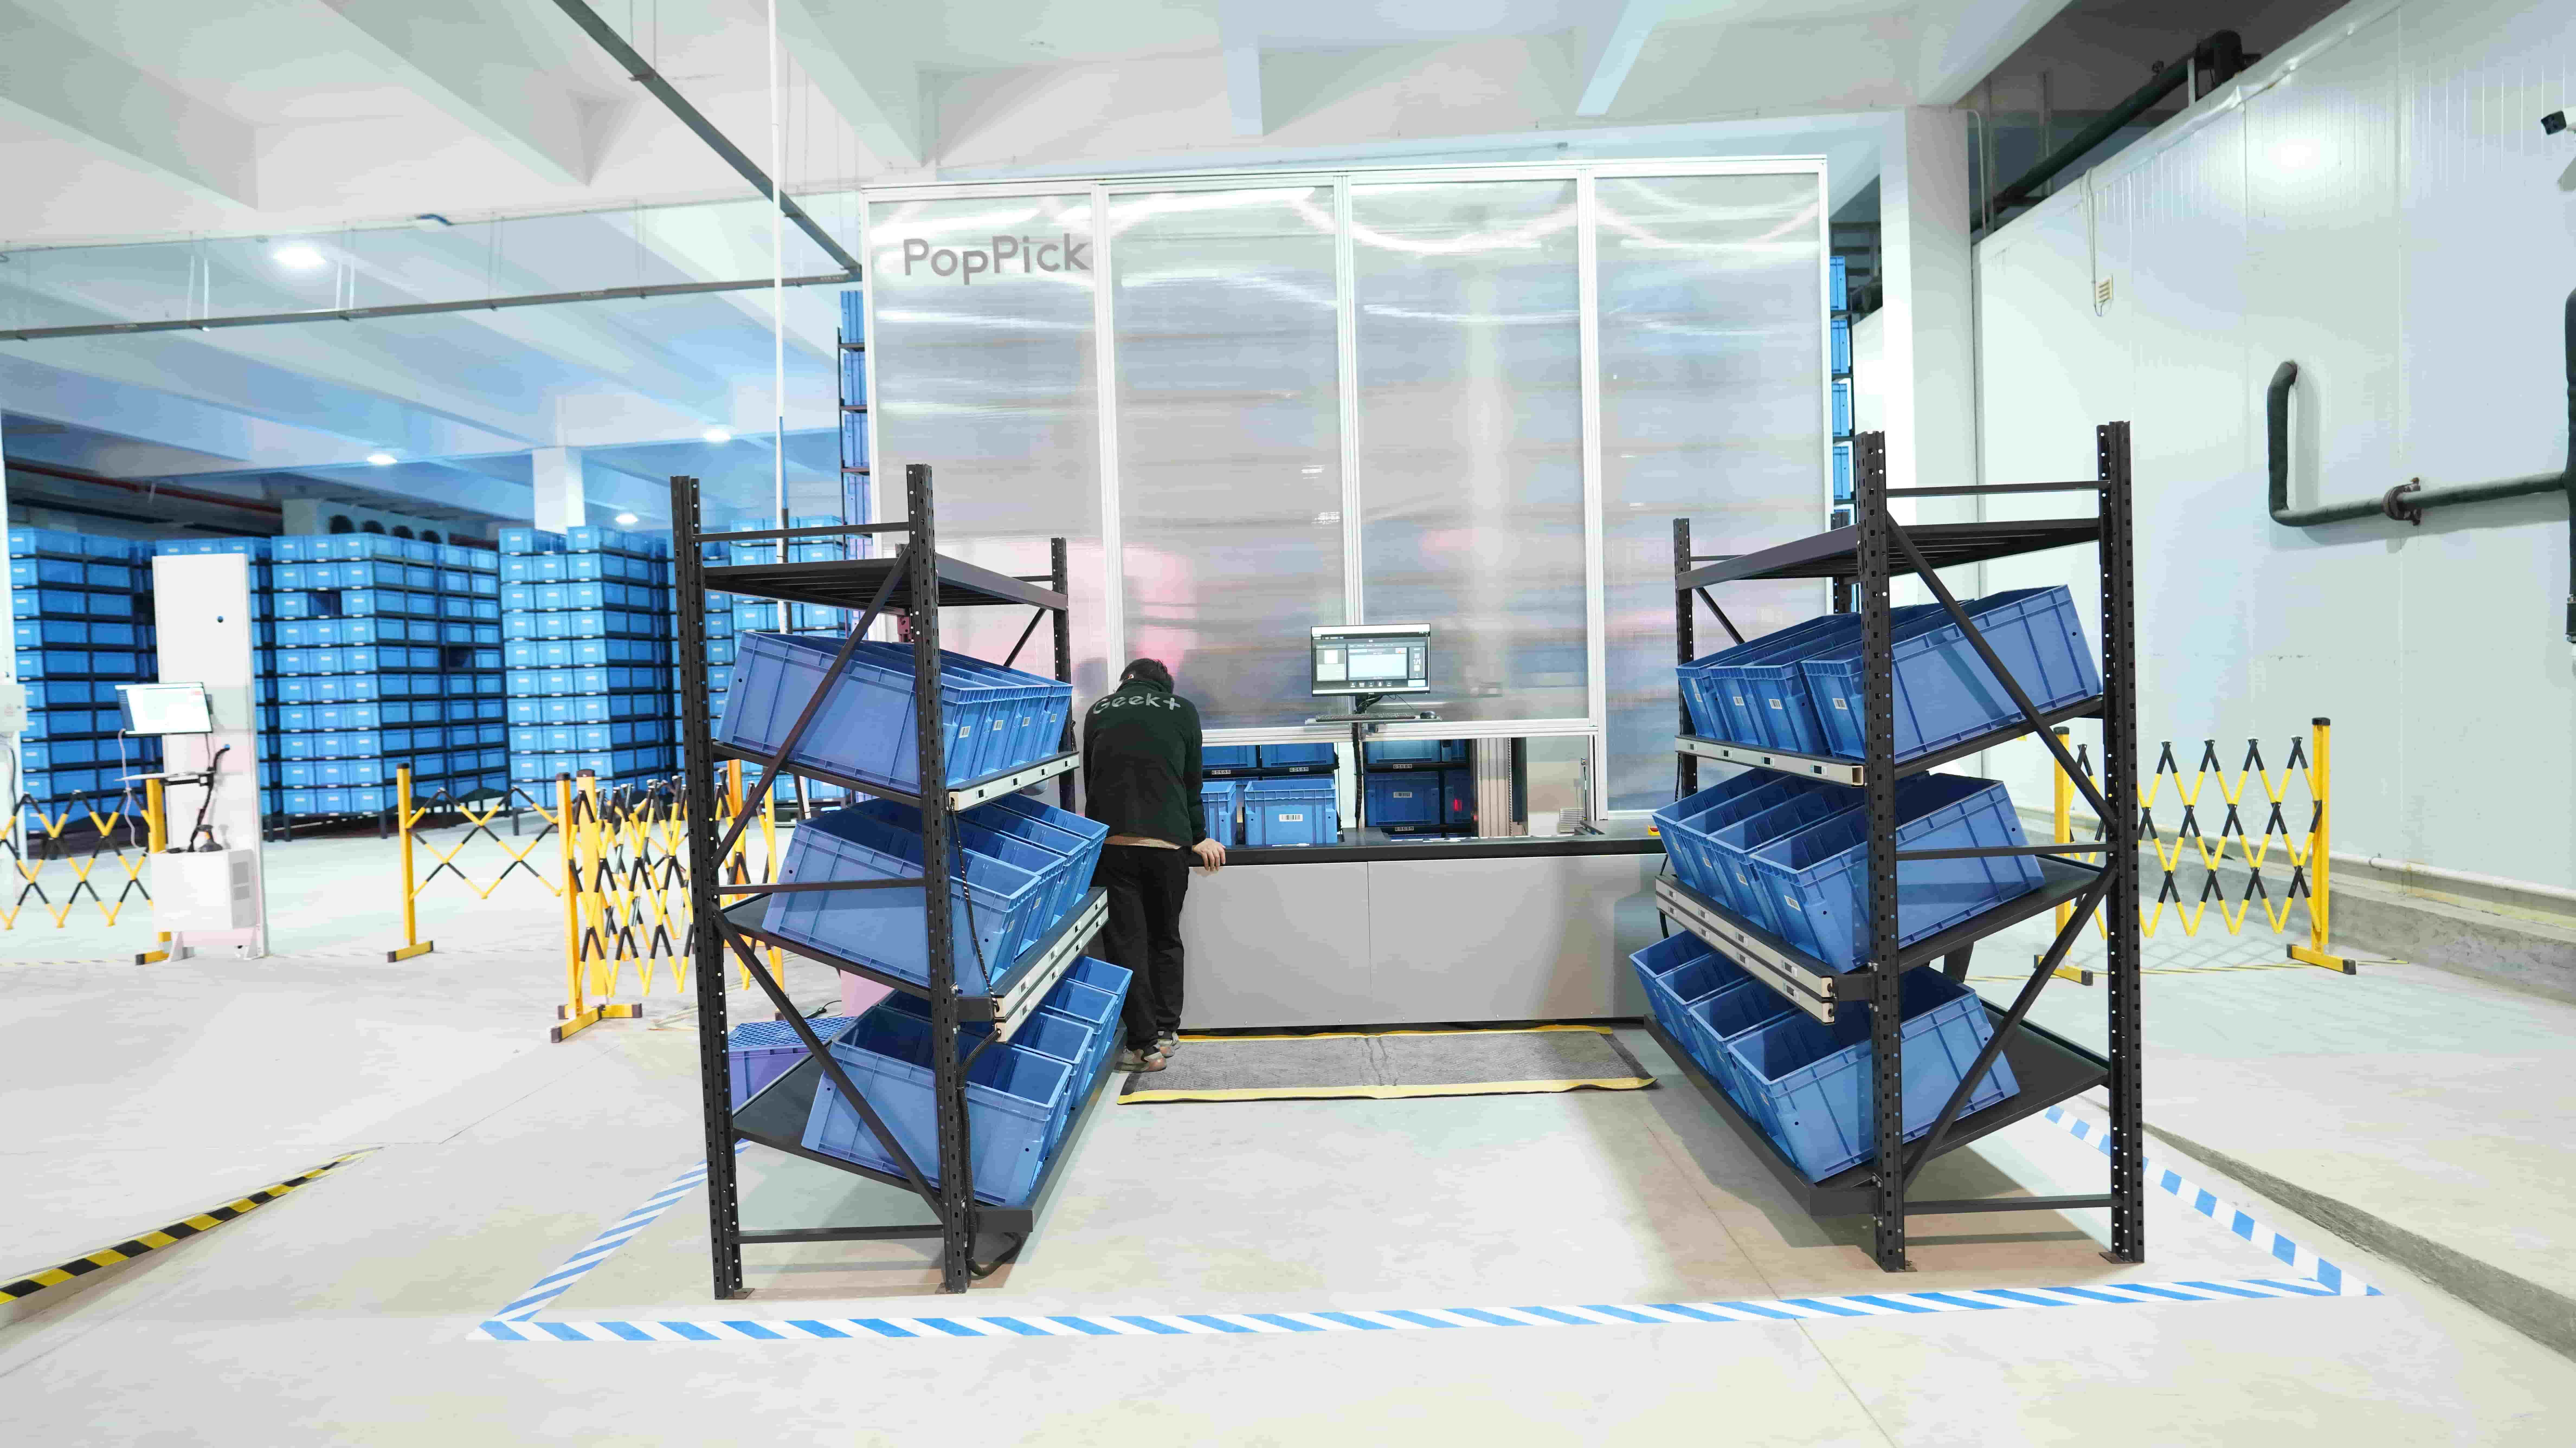 Geek+ to Debut New Hybrid Picking and Sorting Technologies, High-Density Storage Solution, and Upgraded PopPick System and More at ProMat